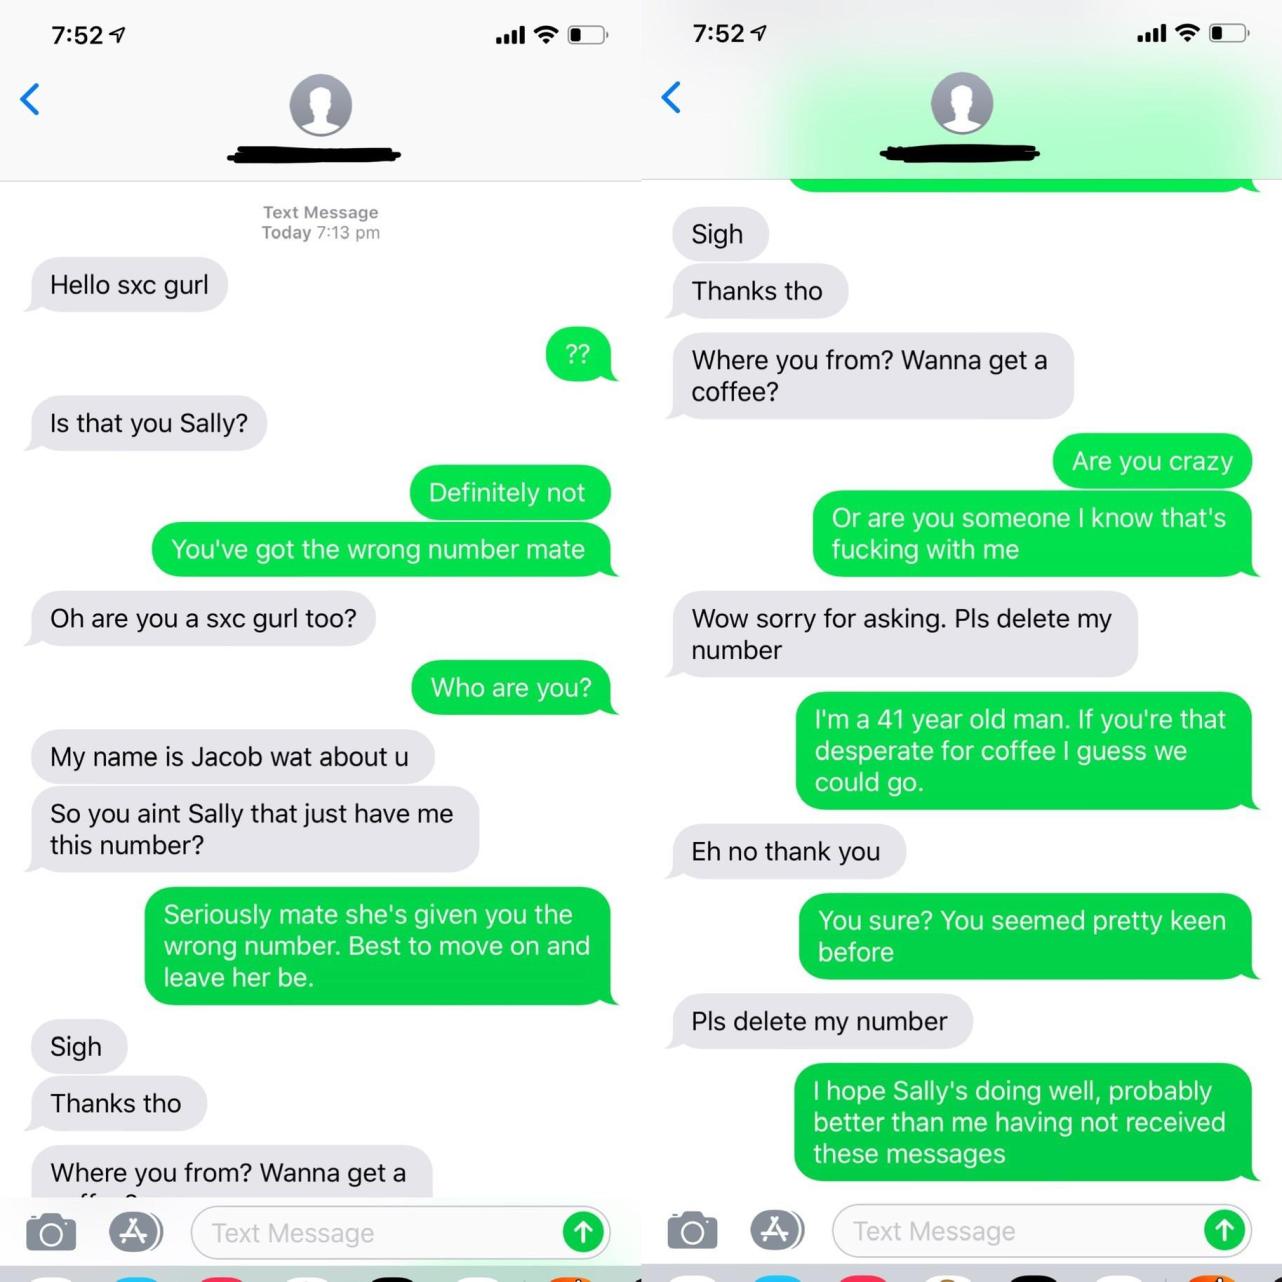 wrong number angle - Text Message Today Sigh Hello sxc gurl Thanks tho Where you from? Wanna get a coffee? Is that you Sally? Are you crazy Definitely not Or are you someone I know that's fucking with me You've got the wrong number mate Oh are you a sxc g